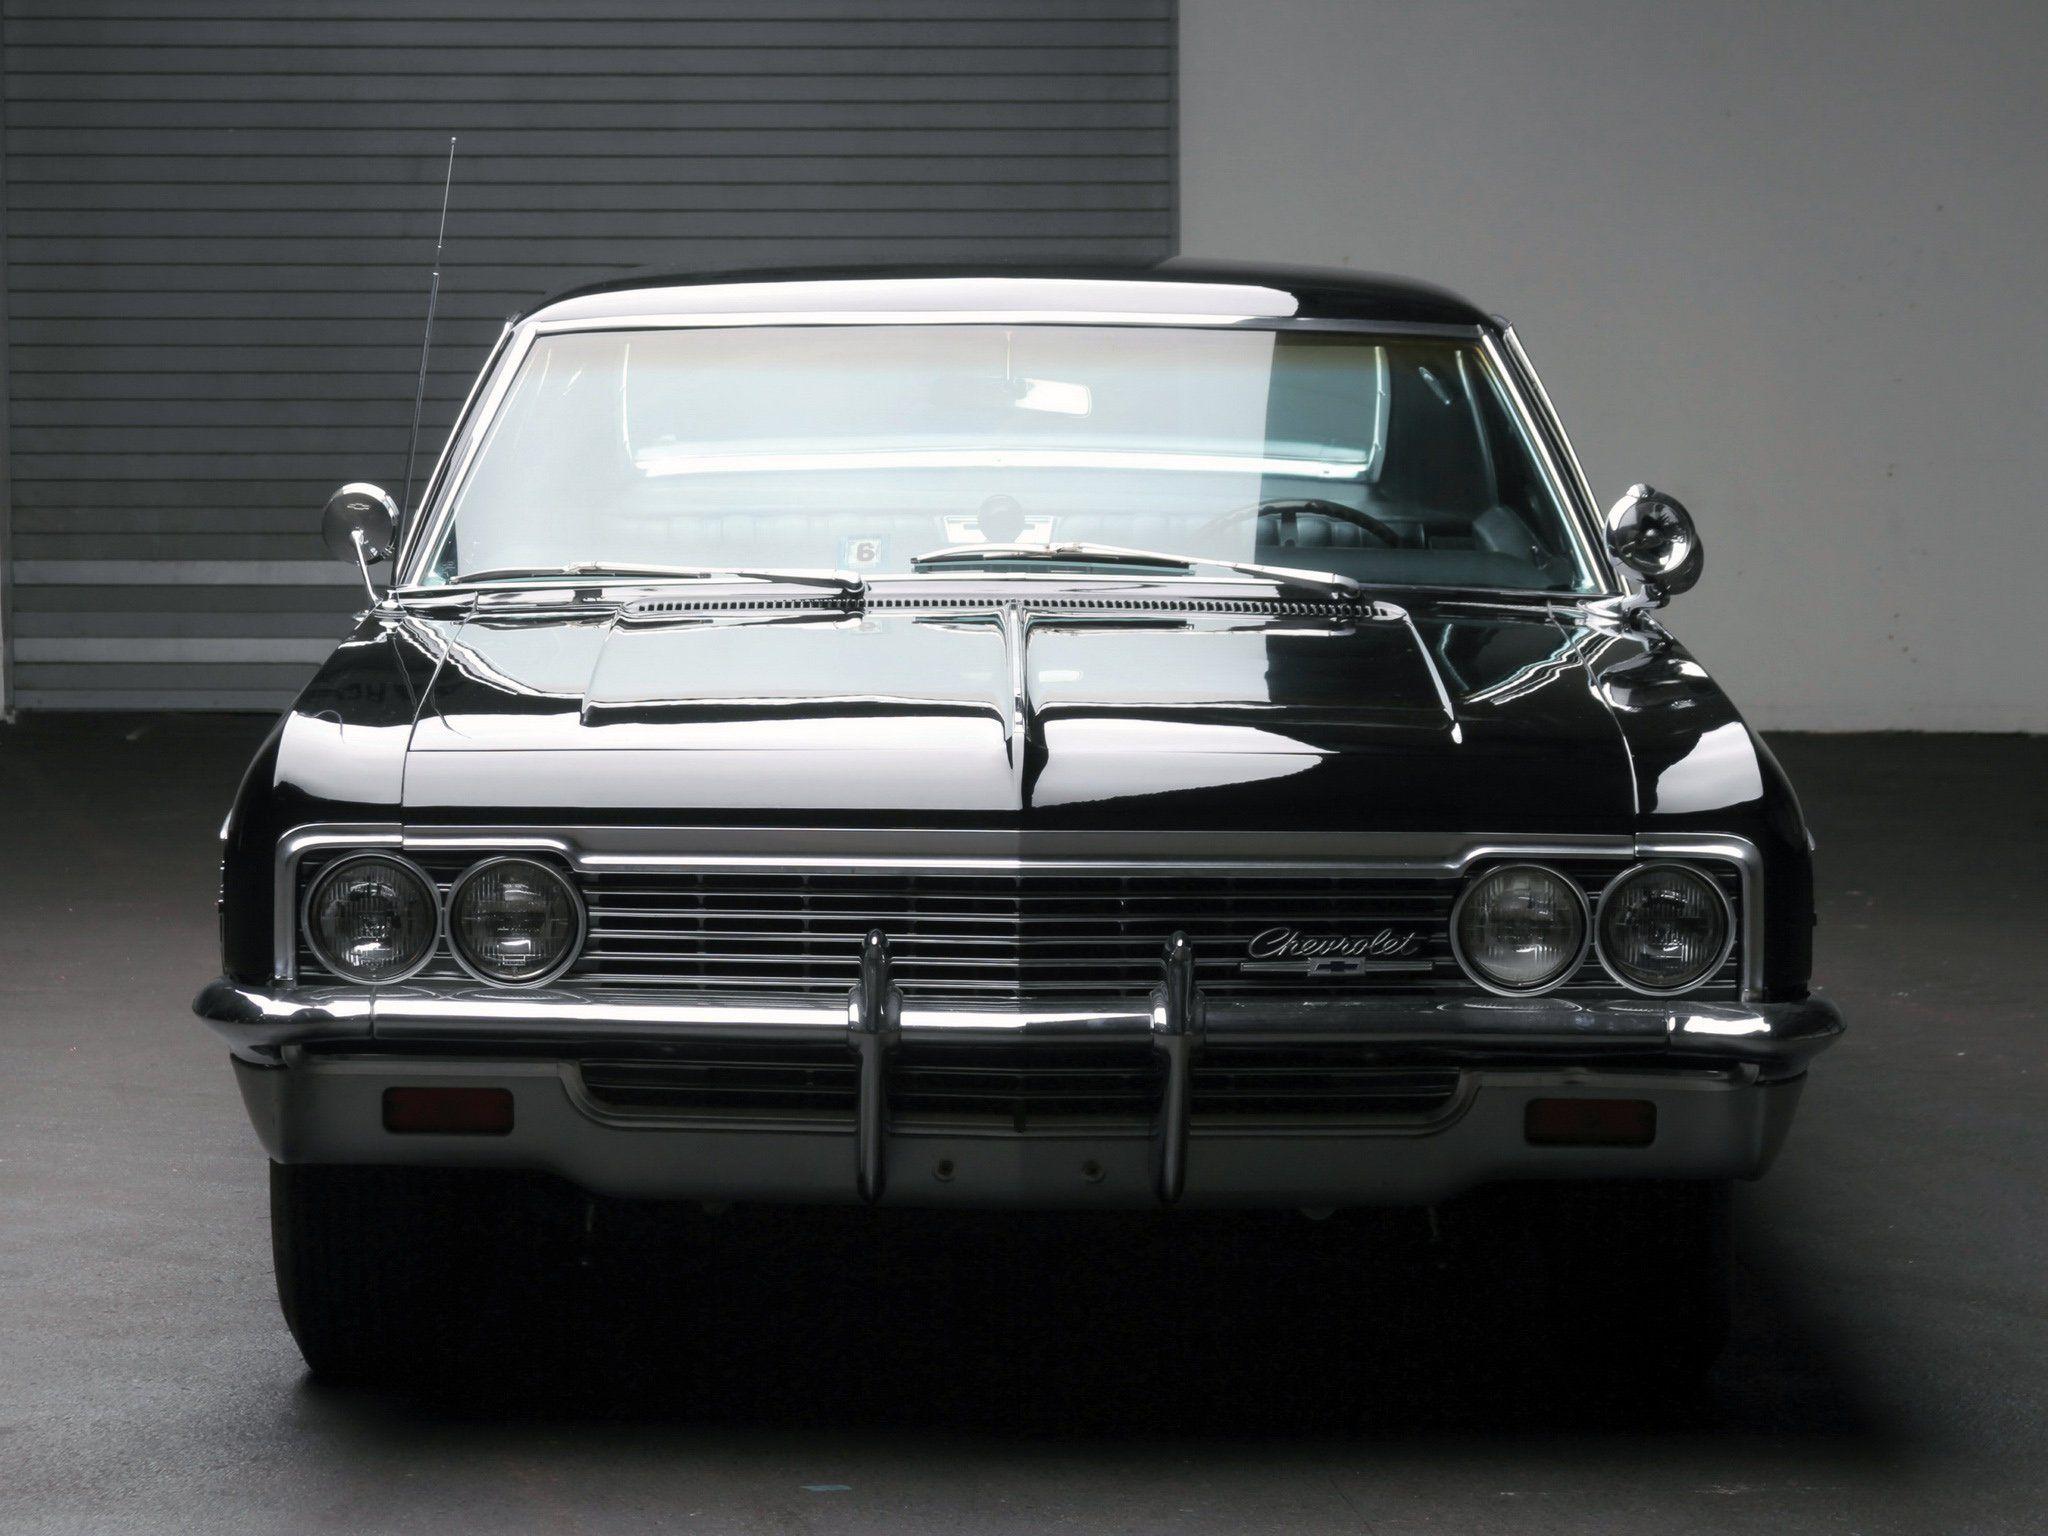 Chevrolet Impala 396 325HP Sport Coupe classic muscle g